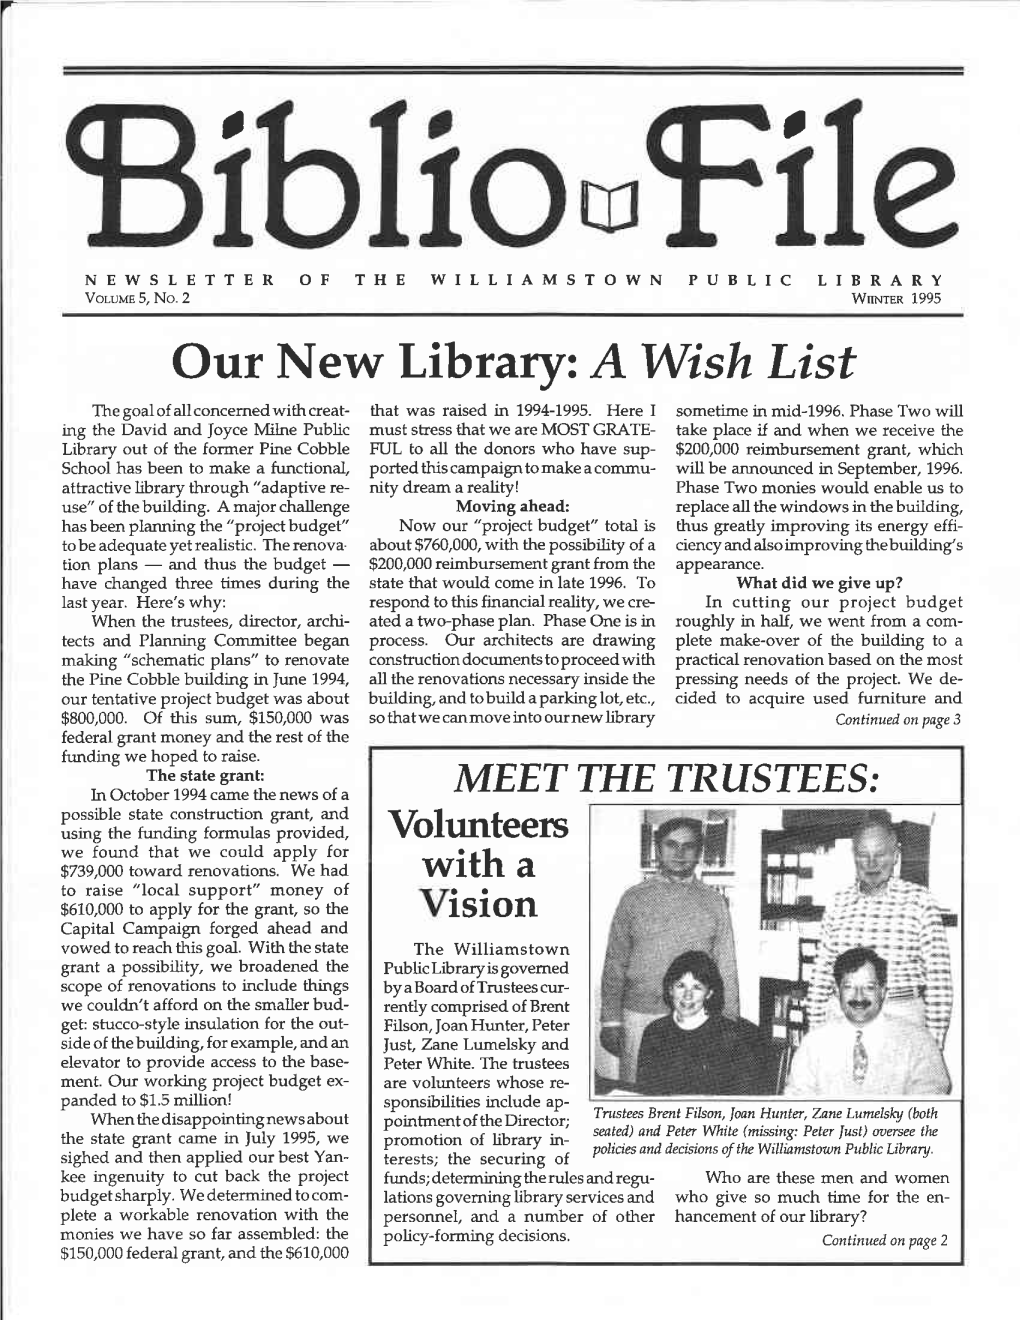 Our New Library: Awish List